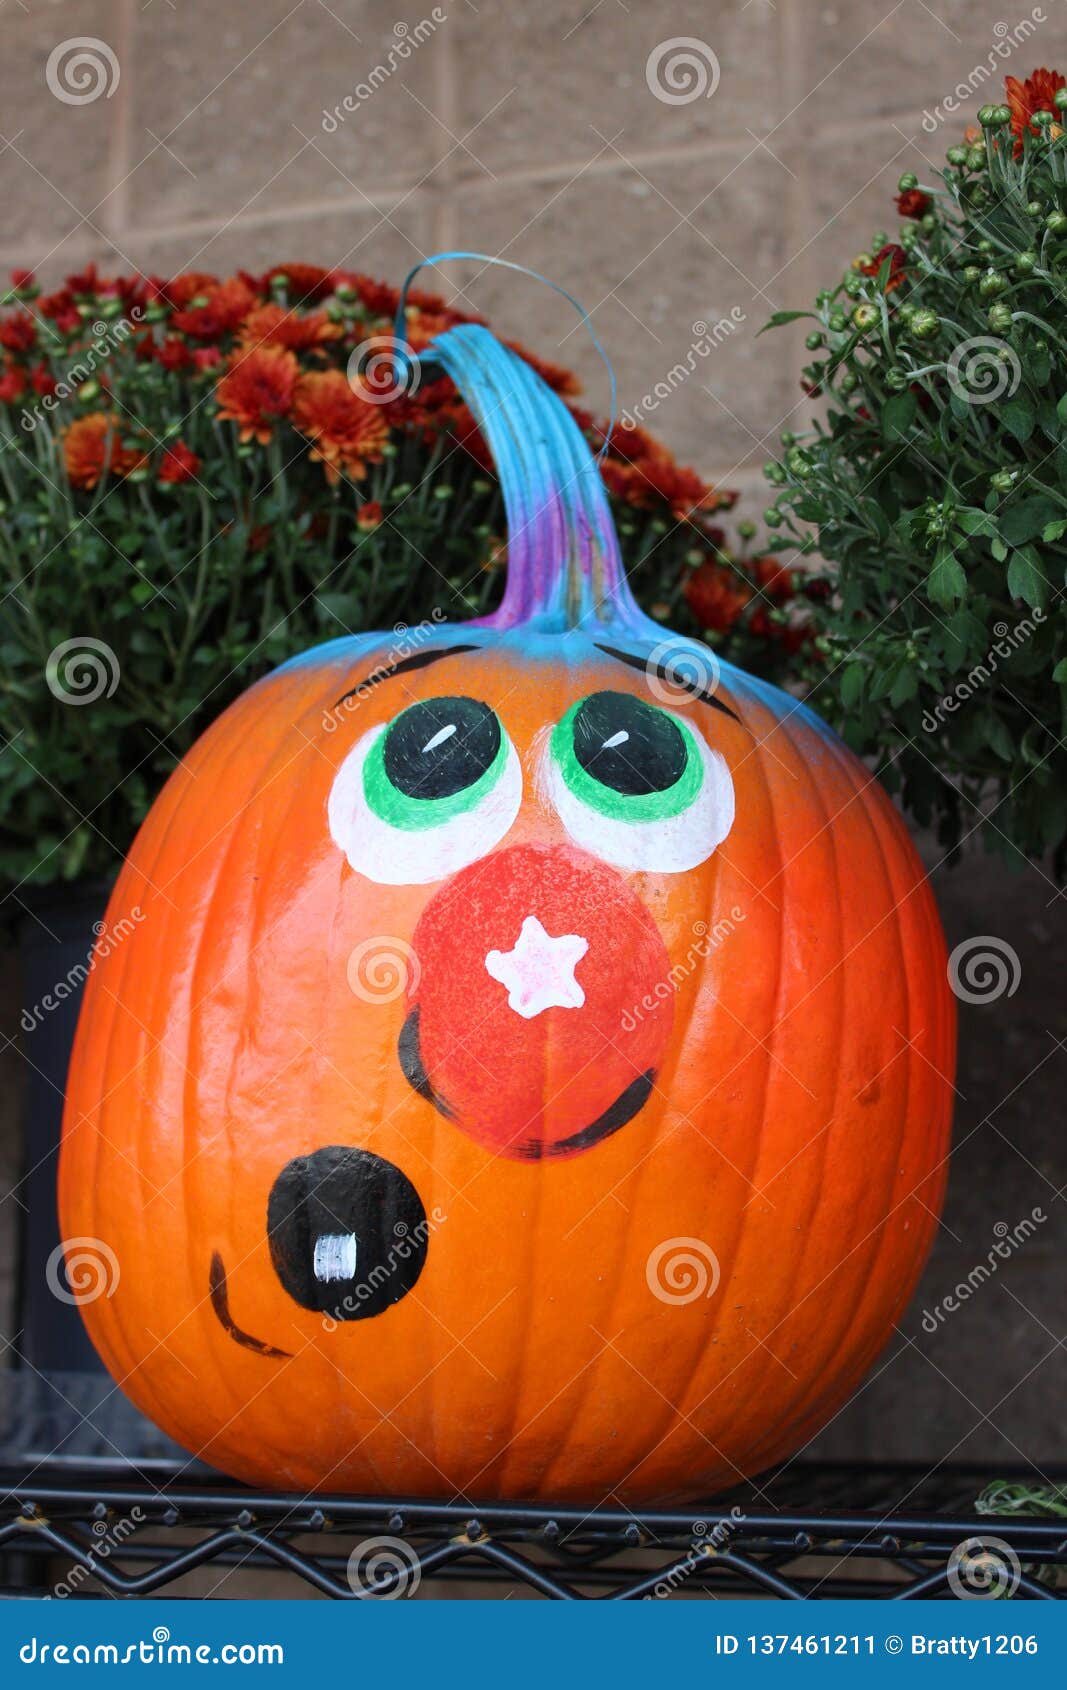 Adorable Whimsical Expression Painted on Halloween Pumpkin Stock Image ...